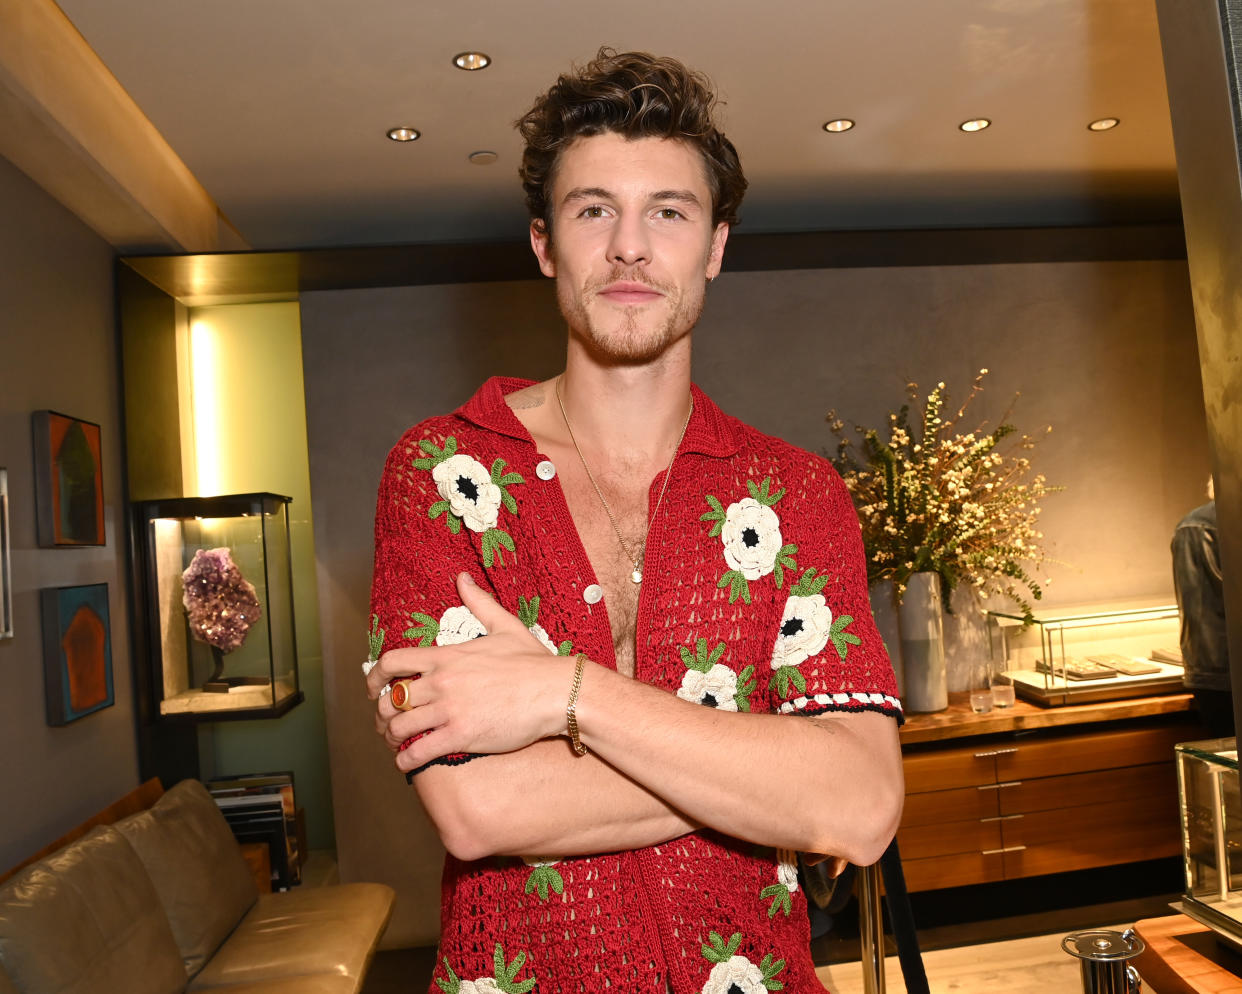 Shawn Mendes is hanging out in the Canadian snow. (Photo by Jon Kopaloff/Getty Images for David Yurman) BEVERLY HILLS, CALIFORNIA - NOVEMBER 15: Shawn Mendes poses as David Yurman hosts event with Shawn Mendes in support of the Shawn Mendes Foundation at David Yurman on November 15, 2023 in Beverly Hills, California. (Photo by Jon Kopaloff/Getty Images for David Yurman)